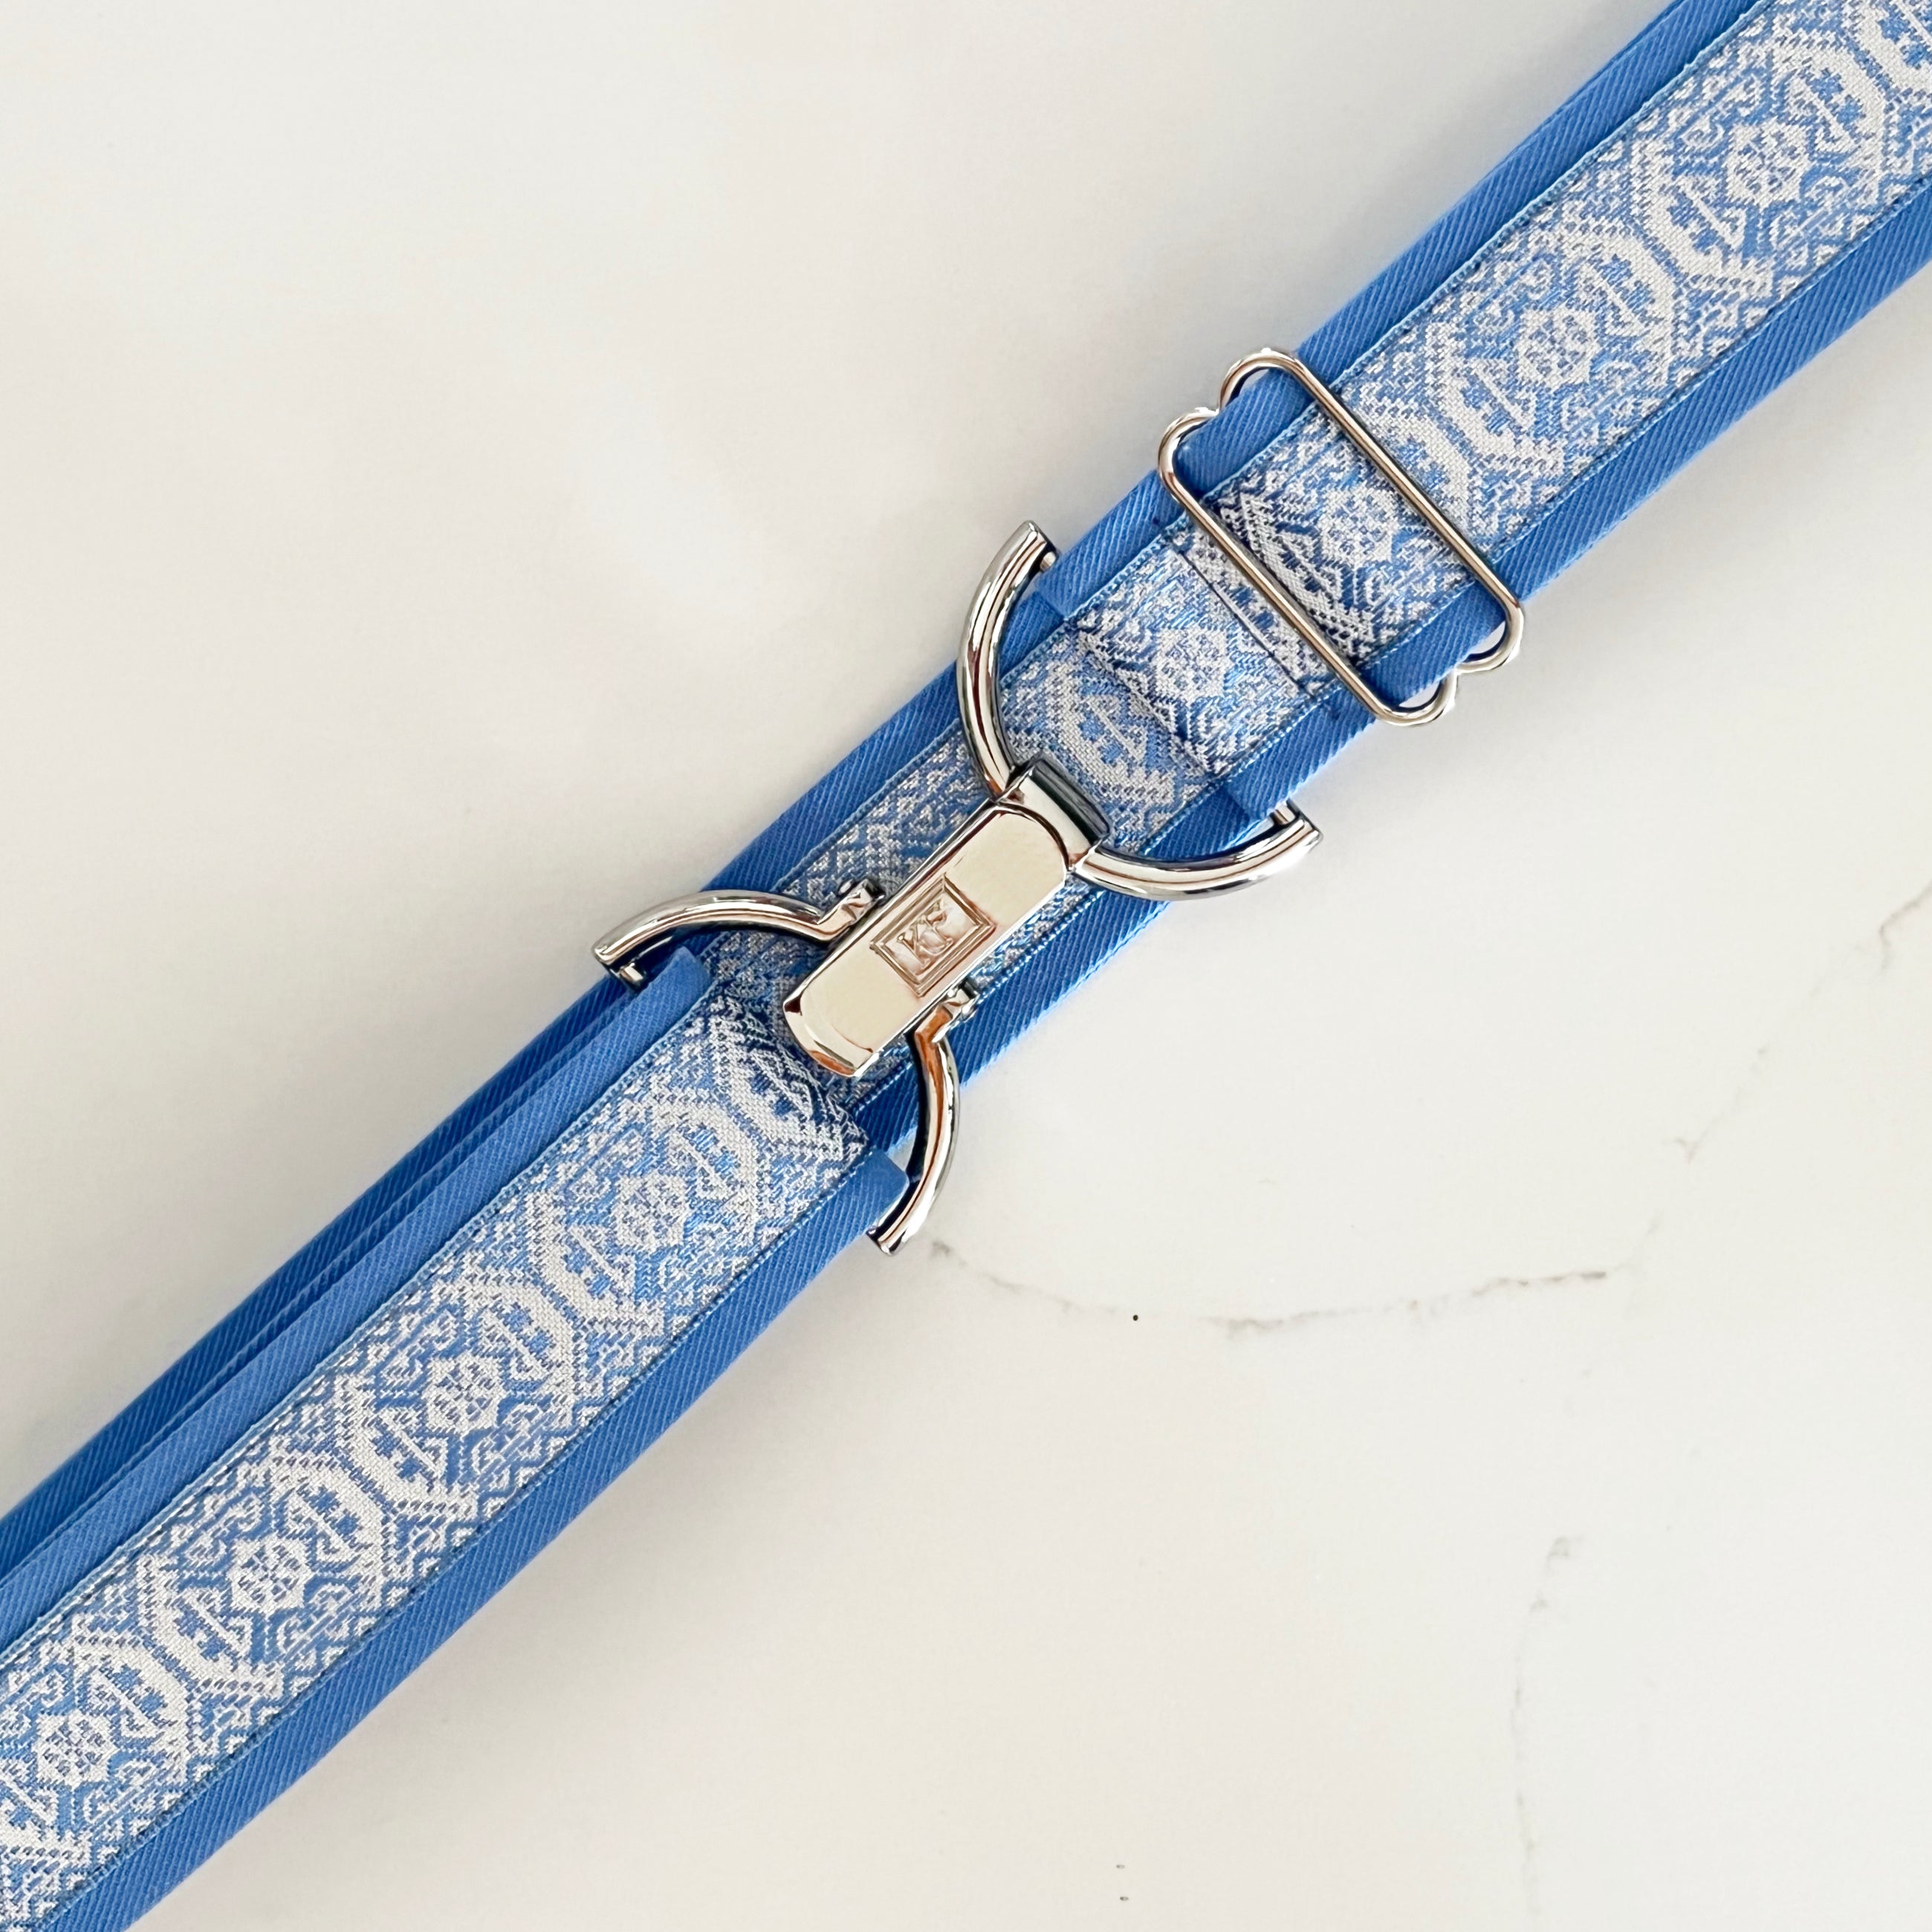 Shimmer blue belt with 1.5" silver clip buckle by KF Clothing